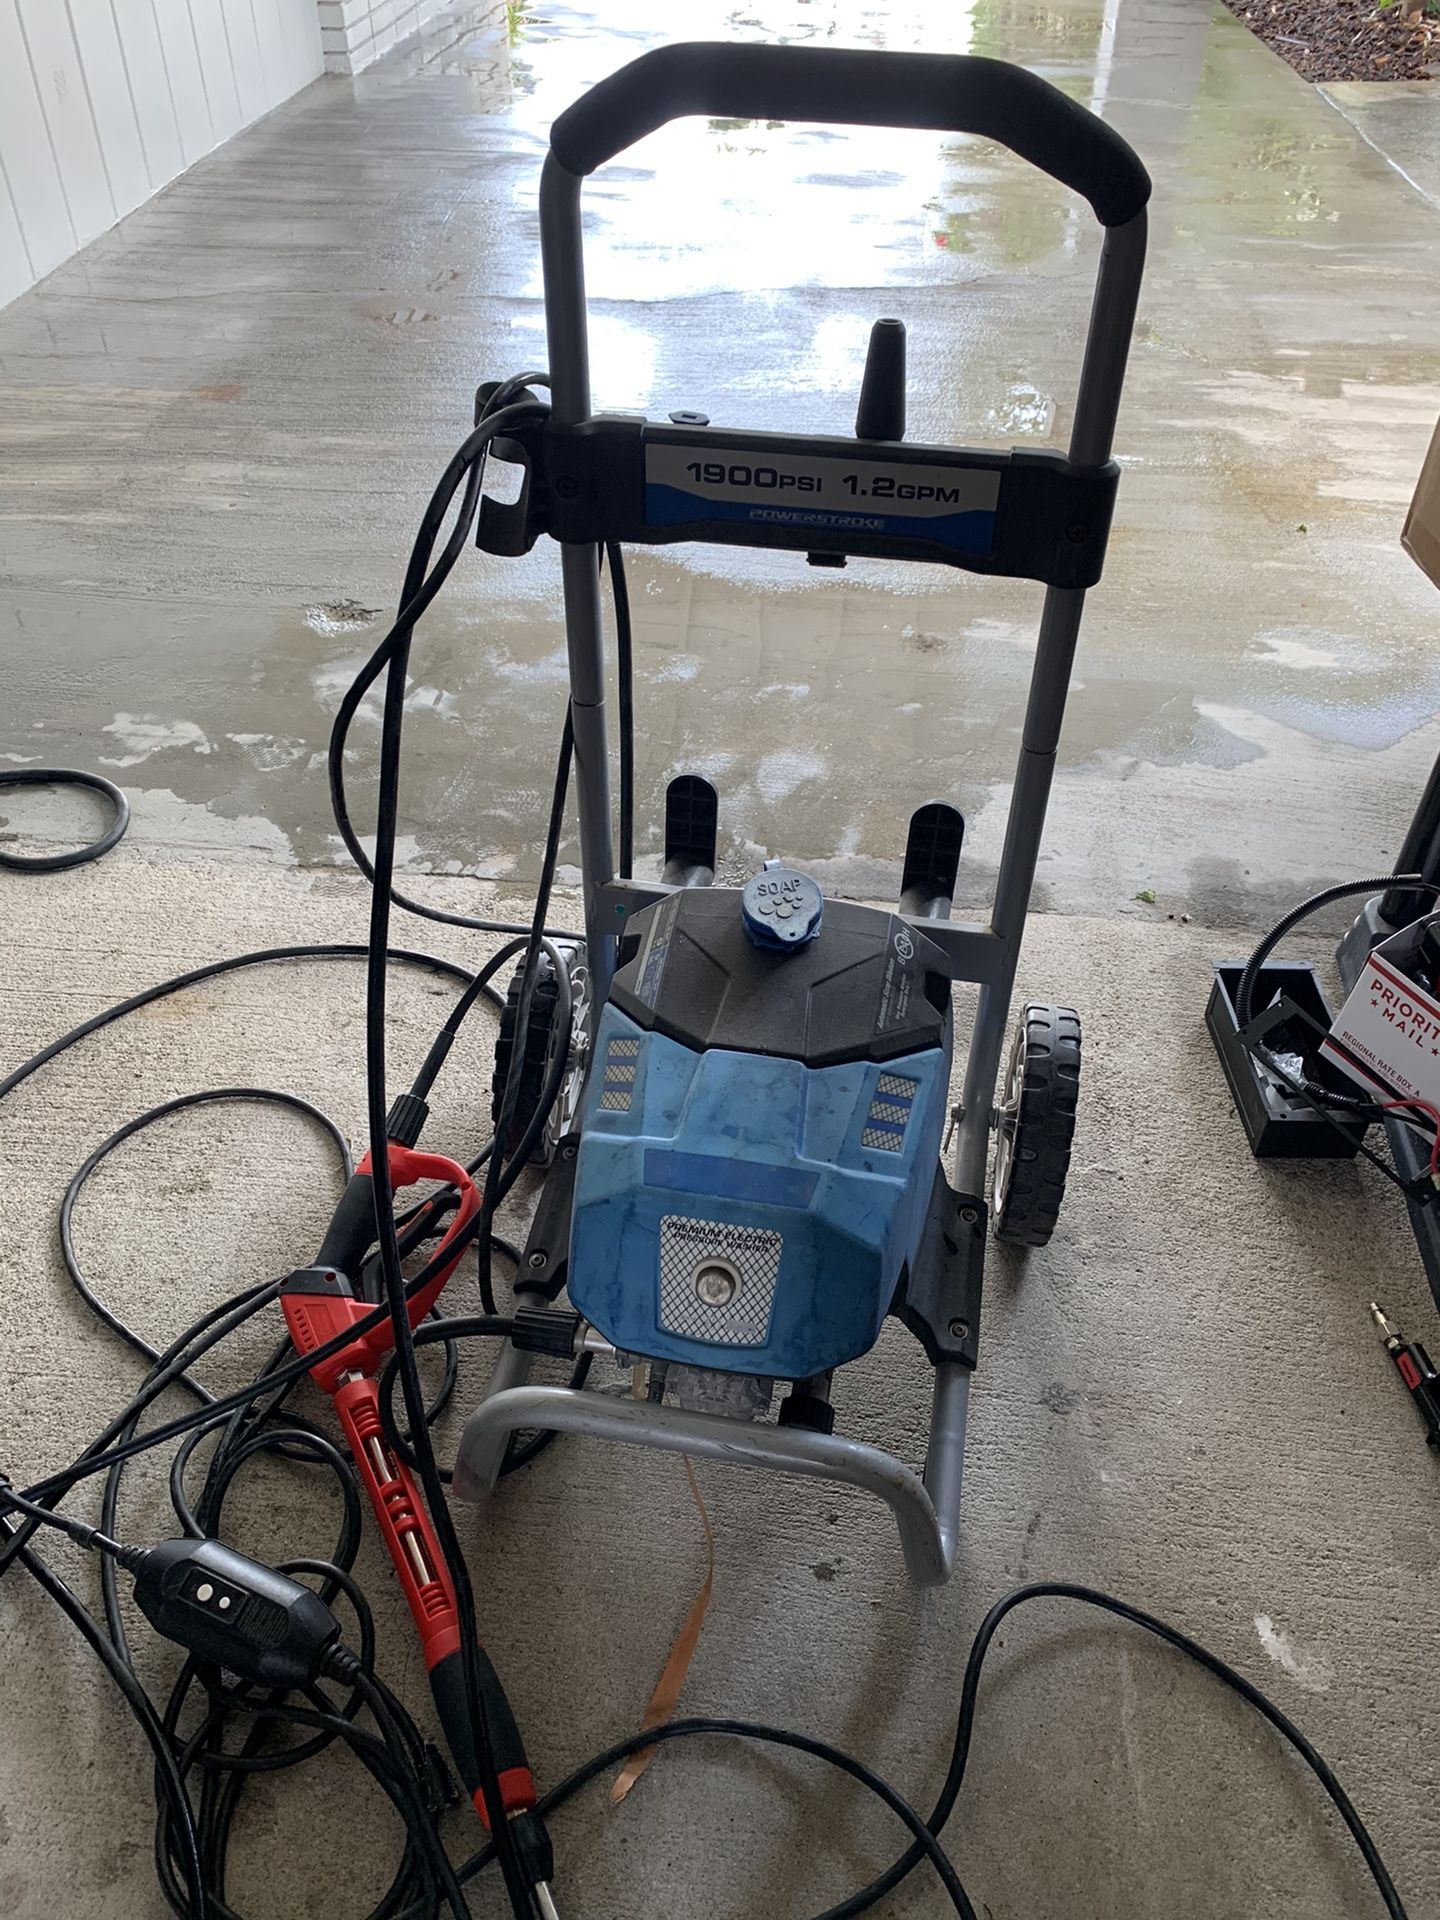 Electric Pressure washer 1900 psi. Works great